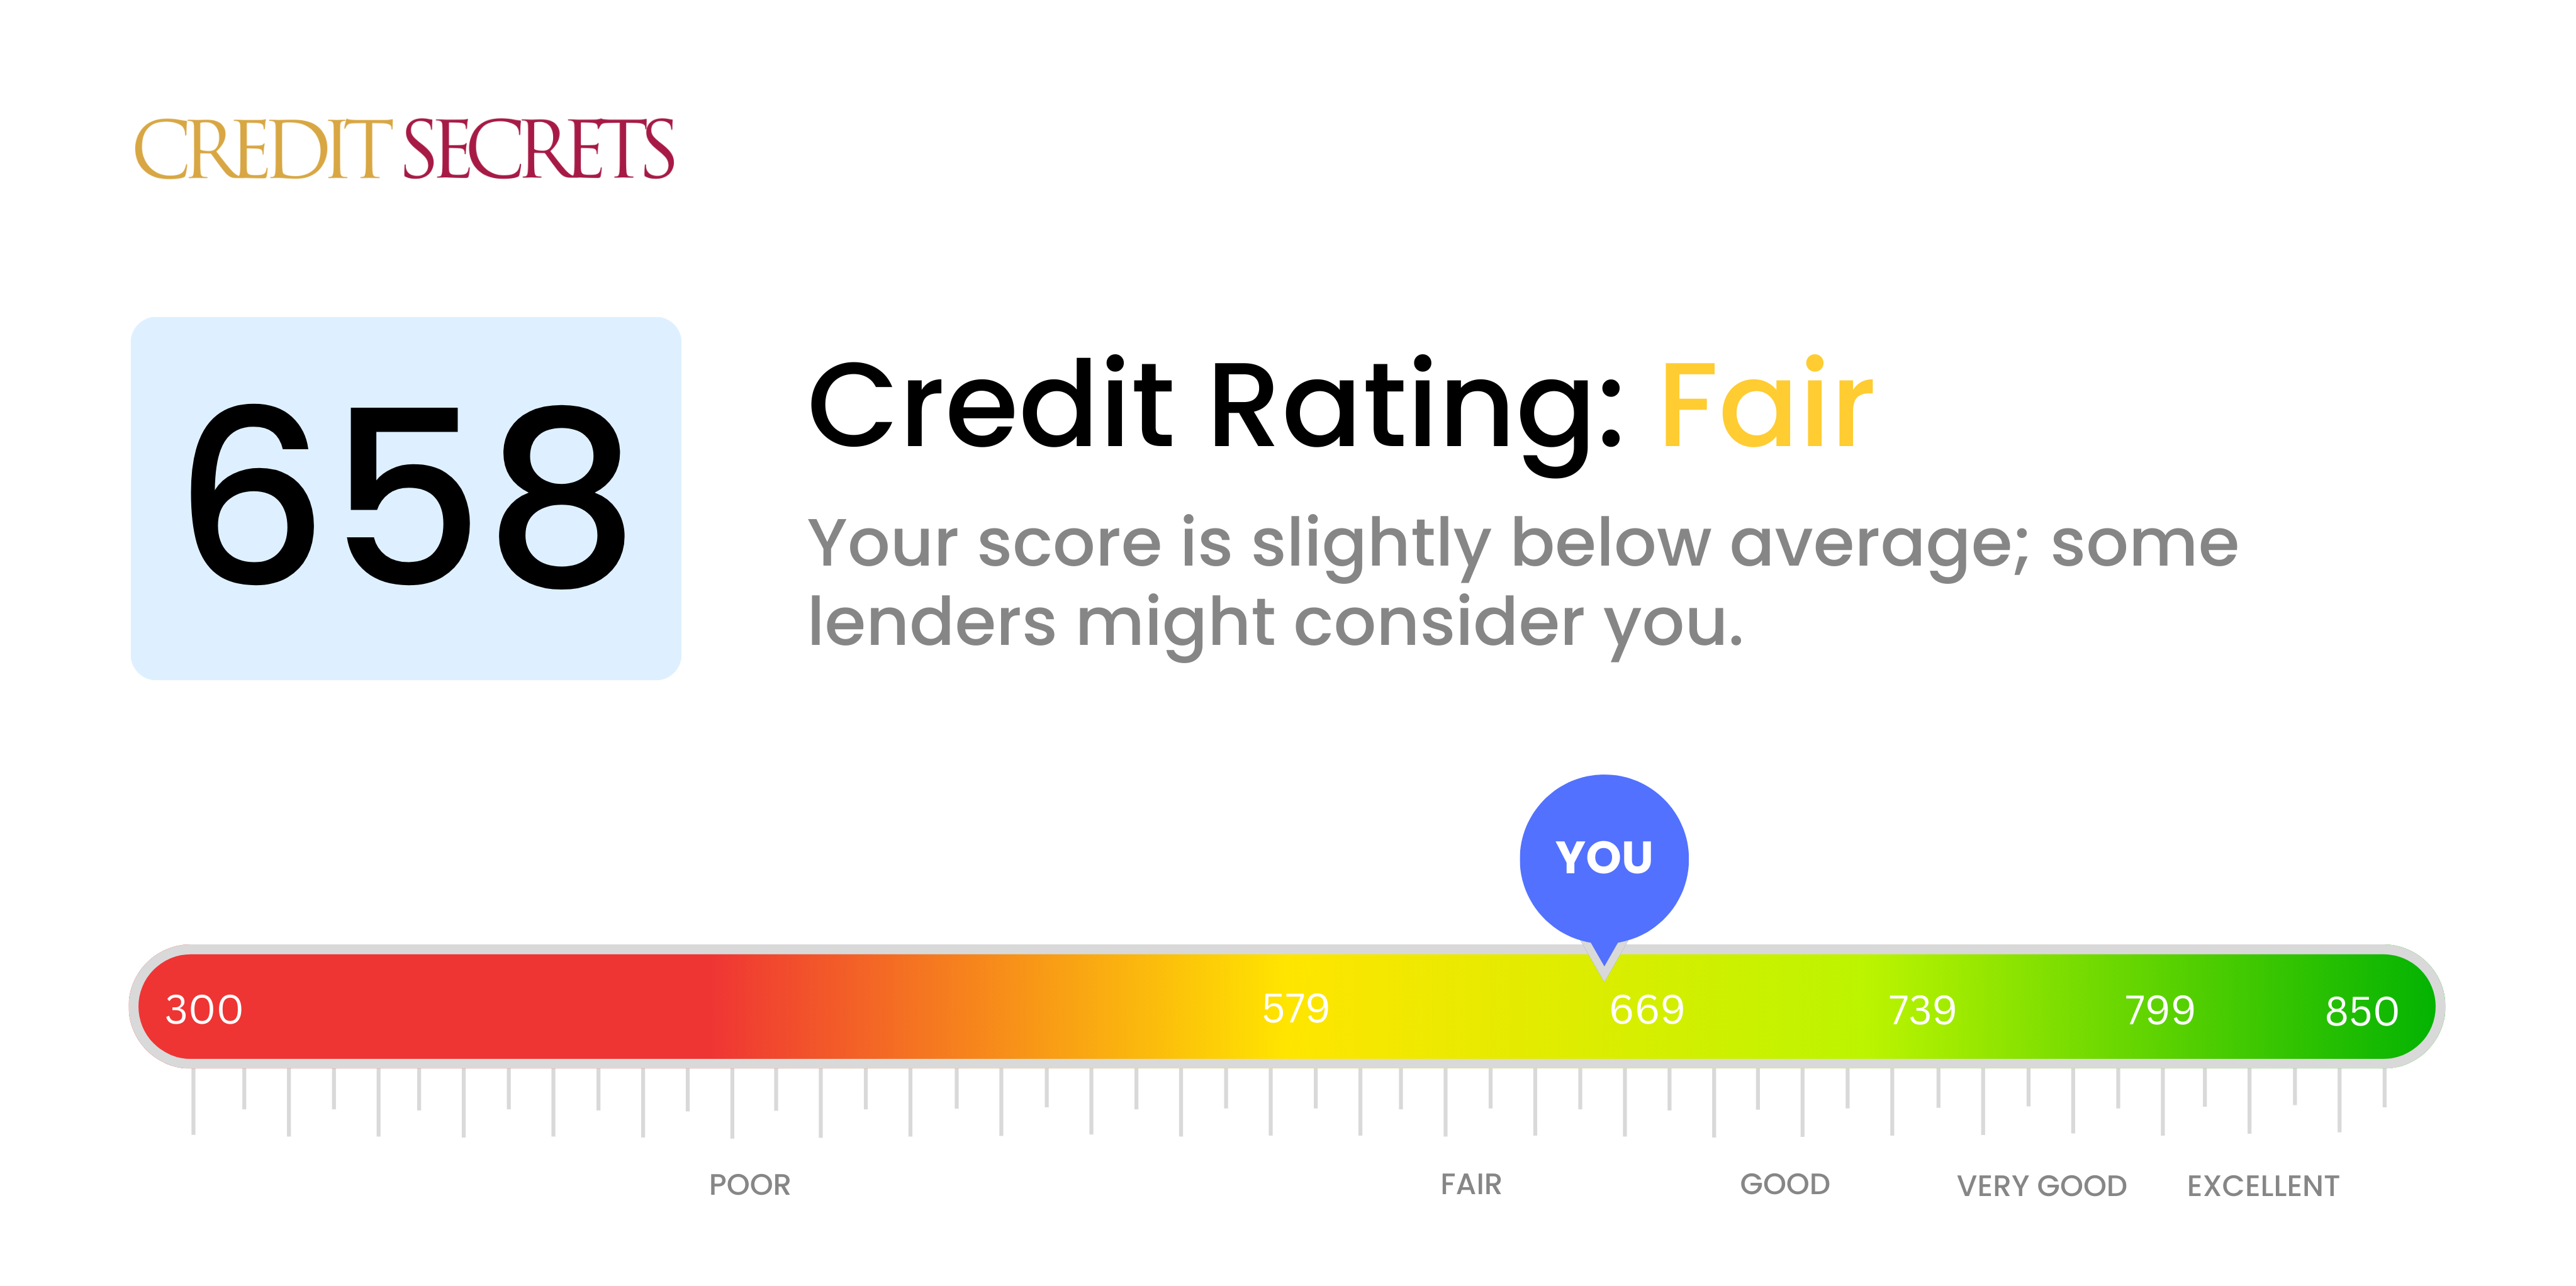 Is 658 a good credit score?